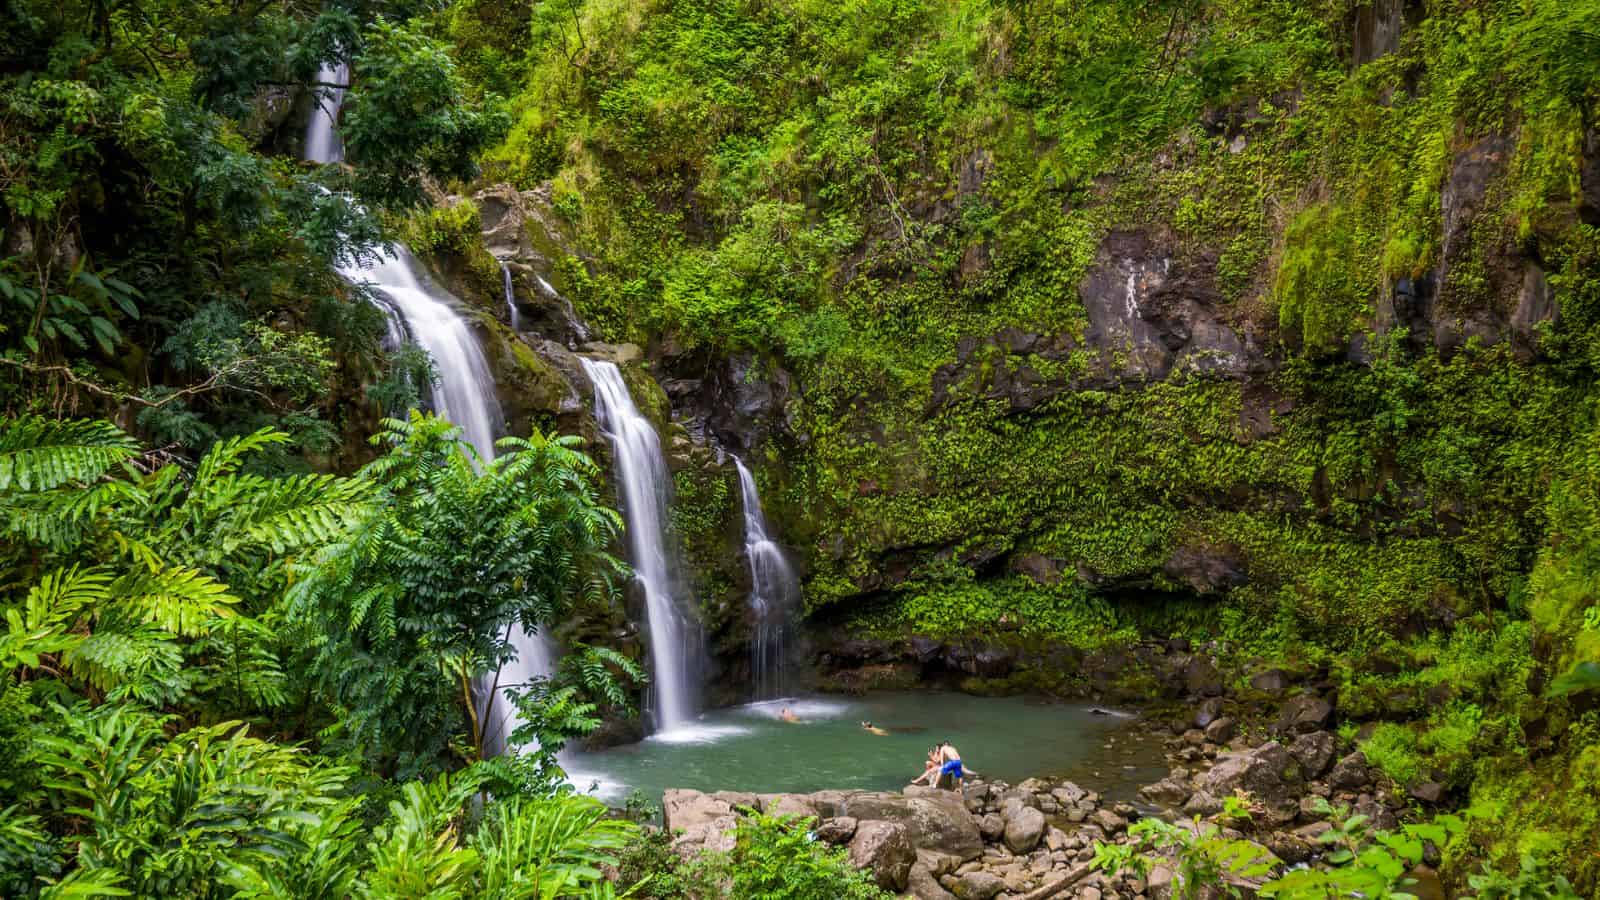 <p>Experience the tropical paradise of <a href="https://whatthefab.com/maui-itinerary.html" rel="follow">Maui</a> on the Hana Highway, a winding road offering waterfalls, lush rainforests, and panoramic ocean views. This 64-mile route stretches from Kahului to the town of Hana, passing through some of Maui’s most scenic landscapes.</p><p>Adventure to waterfalls like Wailua Falls and Ohe’o Gulch, <a href="https://whatthefab.com/best-hikes-in-maui.html" rel="follow">hike</a> through the lush rainforest of <a href="https://www.nps.gov/hale/index.htm" rel="nofollow external noopener noreferrer">Haleakalā National Park</a>, and enjoy the serenity of one of Hawaii’s most photo-worthy islands. The road has many <a href="https://whatthefab.com/best-beaches-in-maui.html" rel="follow">beaches</a> for swimming, snorkeling, and enjoying the natural beauty of this tropical paradise.</p><p>When trying to figure out <a href="https://whatthefab.com/where-to-stay-on-maui.html" rel="follow">where to stay in Maui</a> along your adventure, save money by opting for an <a href="https://whatthefab.com/airbnb-maui-hawaii-best-of-the-best.html" rel="follow">Airbnb</a> rather than one of the island’s many ritzy resorts.</p>